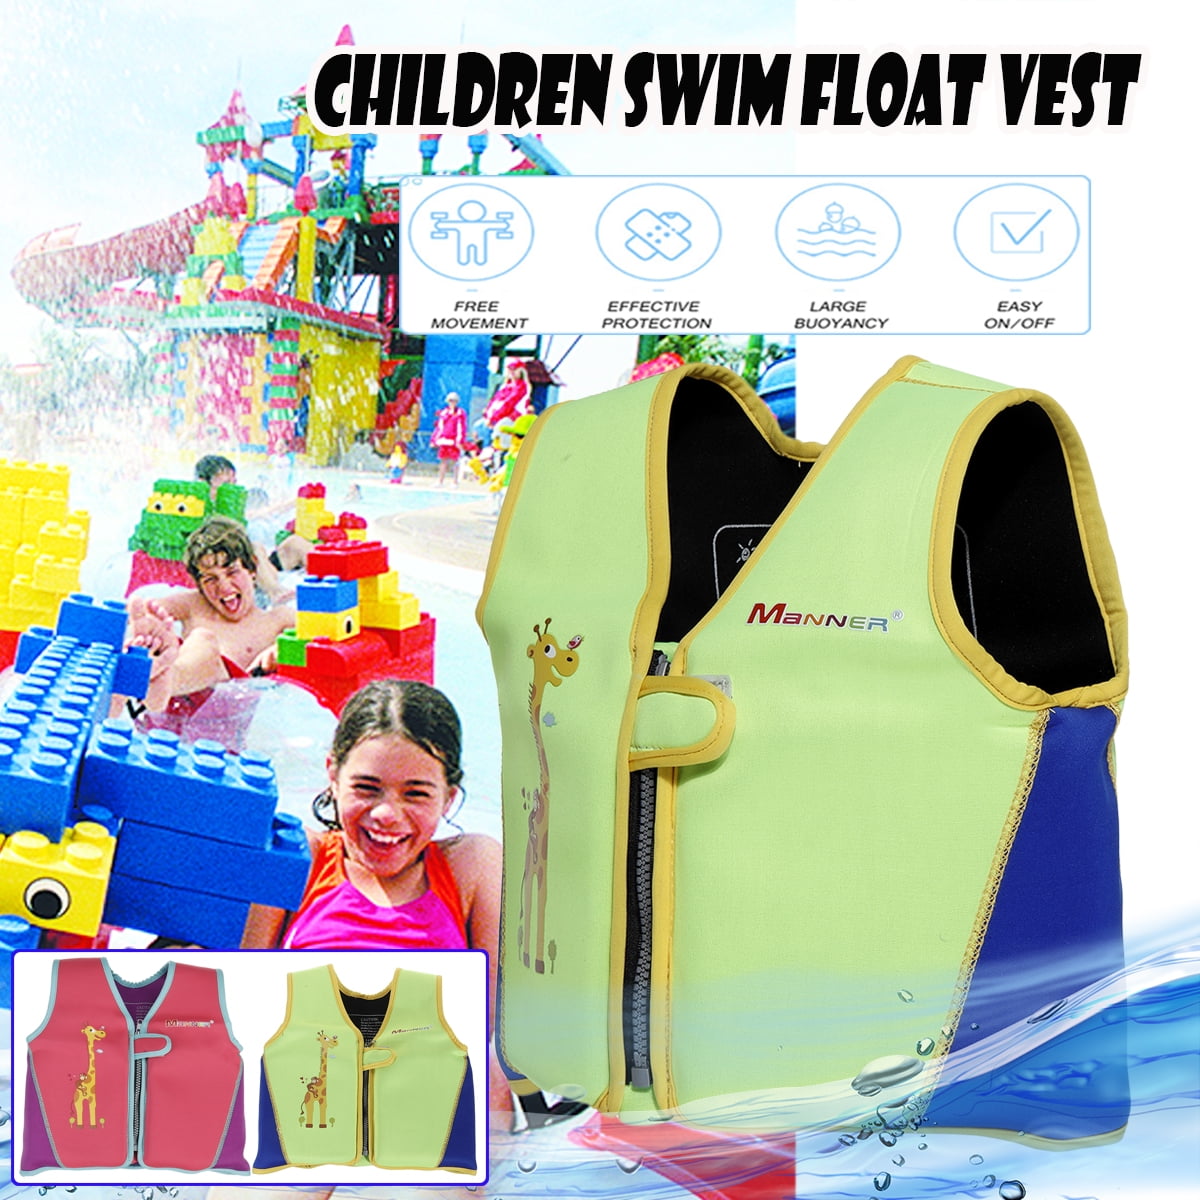 Kids Swim Vest Float Jacket Toddler Buoyancy Swimwear with Emergency Whistle & Adjustable Safety Strap as Swimming Arm Bands Children Flotation Learn to Swim Floats Swimsuit